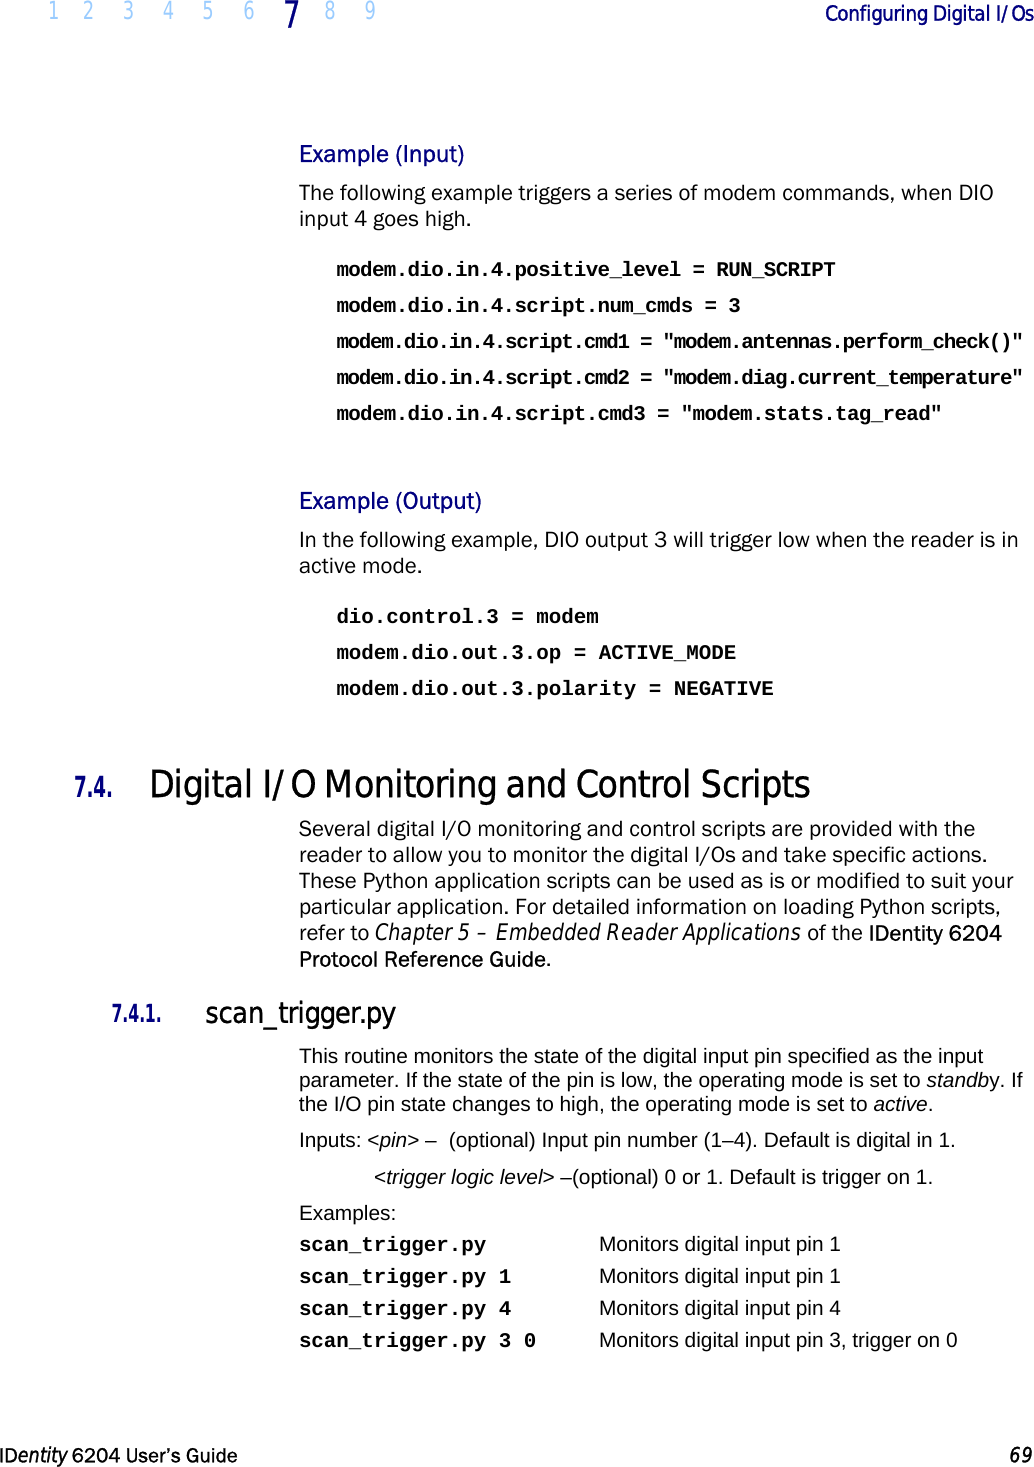  1 2 3 4 5 6 7  8 9        Configuring Digital I/Os   IDentity 6204 User’s Guide  69  Example (Input) The following example triggers a series of modem commands, when DIO input 4 goes high. modem.dio.in.4.positive_level = RUN_SCRIPT modem.dio.in.4.script.num_cmds = 3 modem.dio.in.4.script.cmd1 = &quot;modem.antennas.perform_check()&quot; modem.dio.in.4.script.cmd2 = &quot;modem.diag.current_temperature&quot; modem.dio.in.4.script.cmd3 = &quot;modem.stats.tag_read&quot;  Example (Output) In the following example, DIO output 3 will trigger low when the reader is in active mode. dio.control.3 = modem modem.dio.out.3.op = ACTIVE_MODE modem.dio.out.3.polarity = NEGATIVE  7.4. Digital I/O Monitoring and Control Scripts Several digital I/O monitoring and control scripts are provided with the reader to allow you to monitor the digital I/Os and take specific actions. These Python application scripts can be used as is or modified to suit your particular application. For detailed information on loading Python scripts, refer to Chapter 5 – Embedded Reader Applications of the IDentity 6204 Protocol Reference Guide. 7.4.1. scan_trigger.py This routine monitors the state of the digital input pin specified as the input parameter. If the state of the pin is low, the operating mode is set to standby. If the I/O pin state changes to high, the operating mode is set to active. Inputs: &lt;pin&gt; –  (optional) Input pin number (1–4). Default is digital in 1.  &lt;trigger logic level&gt; –(optional) 0 or 1. Default is trigger on 1. Examples: scan_trigger.py    Monitors digital input pin 1 scan_trigger.py 1    Monitors digital input pin 1 scan_trigger.py 4    Monitors digital input pin 4 scan_trigger.py 3 0  Monitors digital input pin 3, trigger on 0 